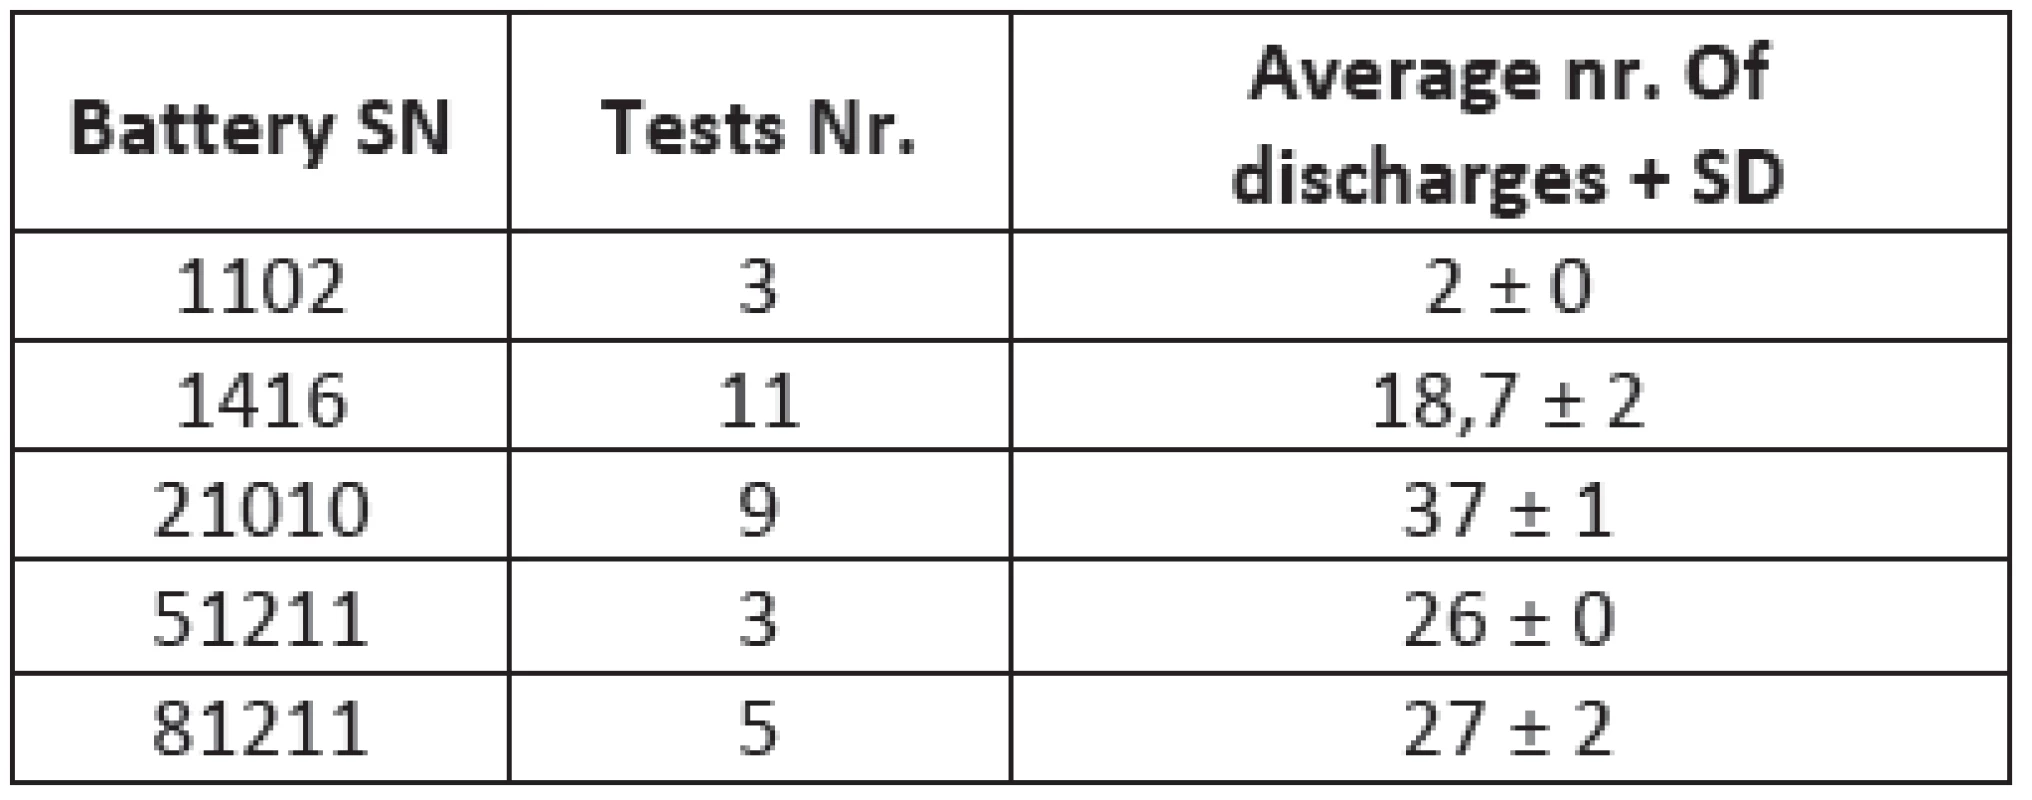 The comparison between different types of batteries tested with our device